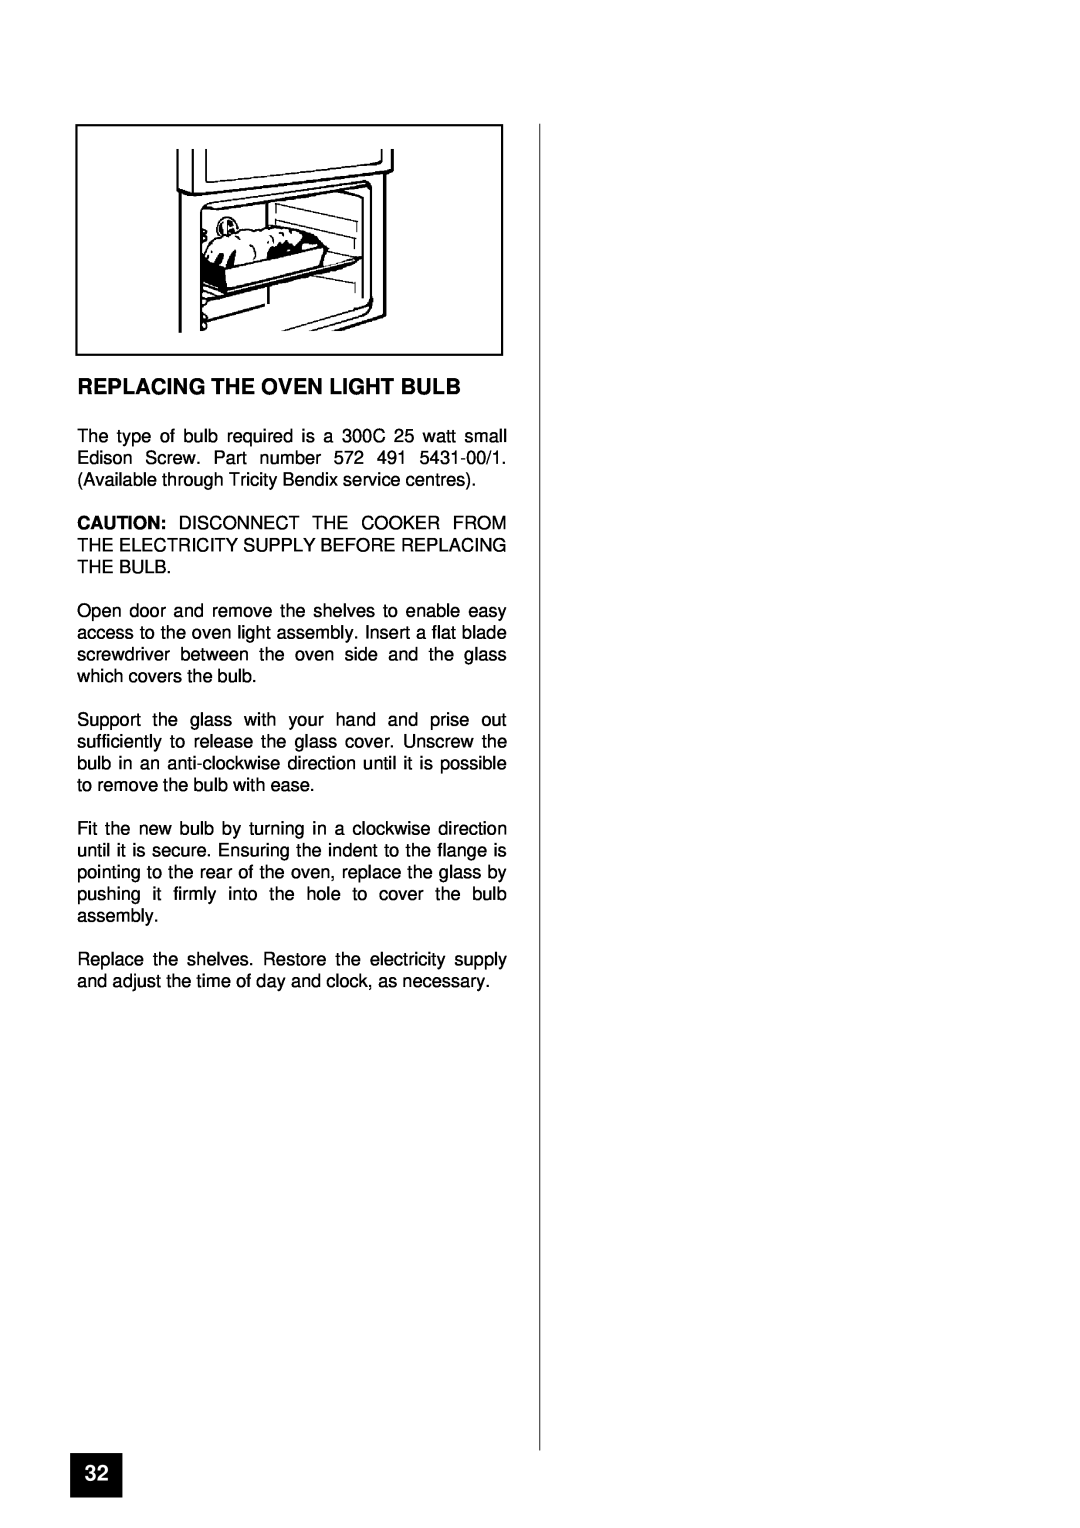 Tricity Bendix BD 985 installation instructions Replacing The Oven Light Bulb 